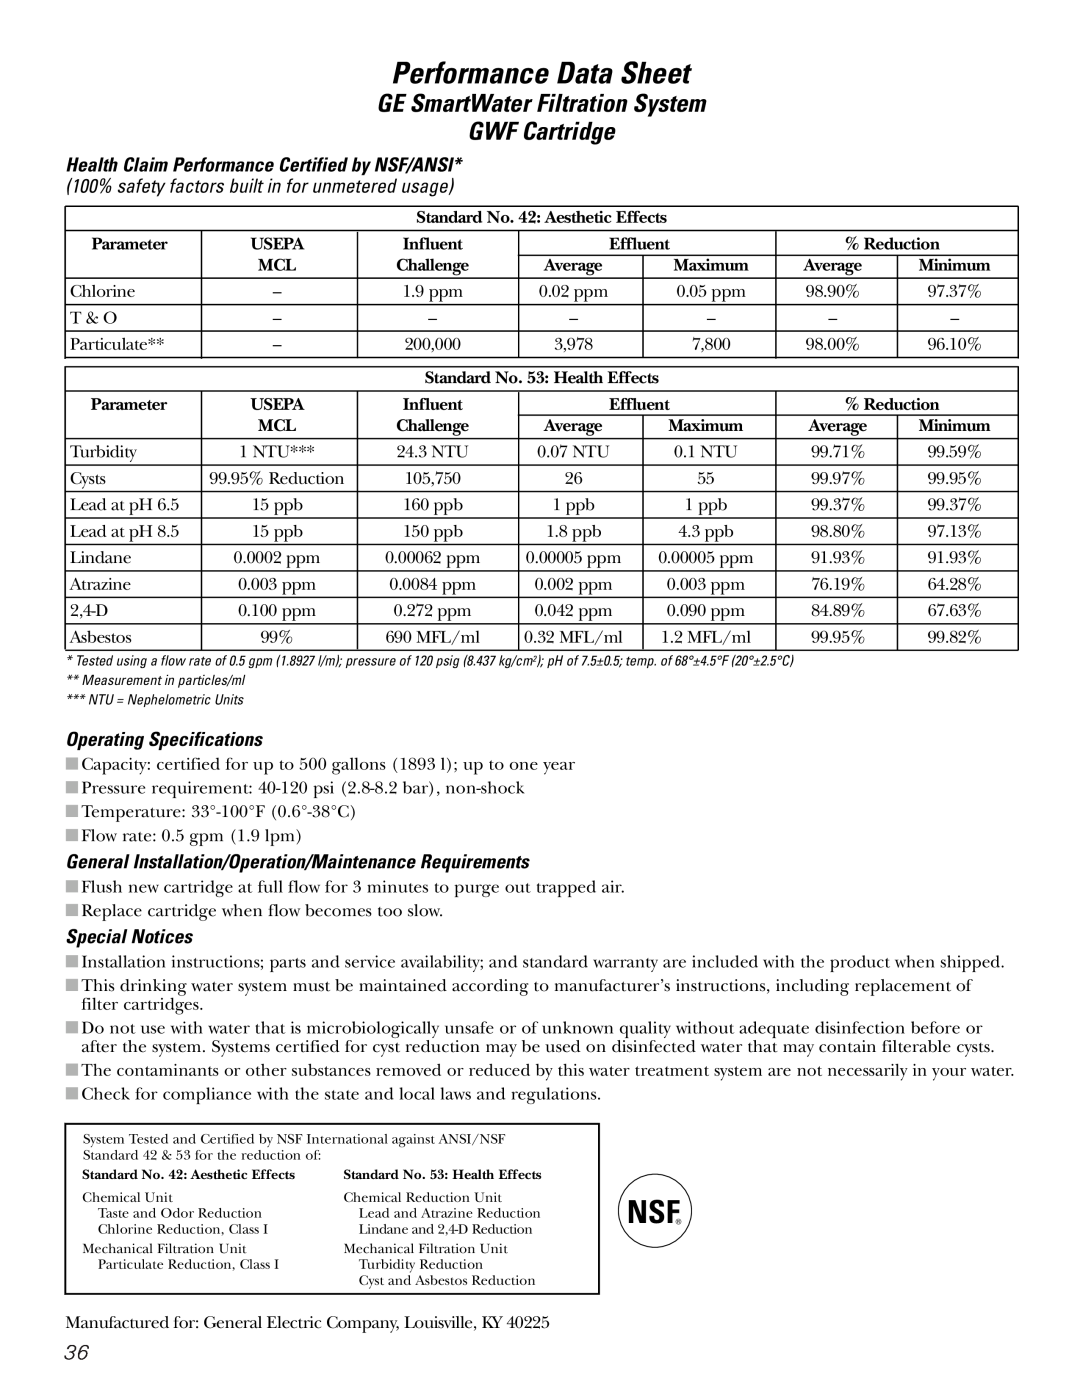 GE 200D2600P015 Performance Data Sheet, GE SmartWater Filtration System GWF Cartridge, Operating Specifications 